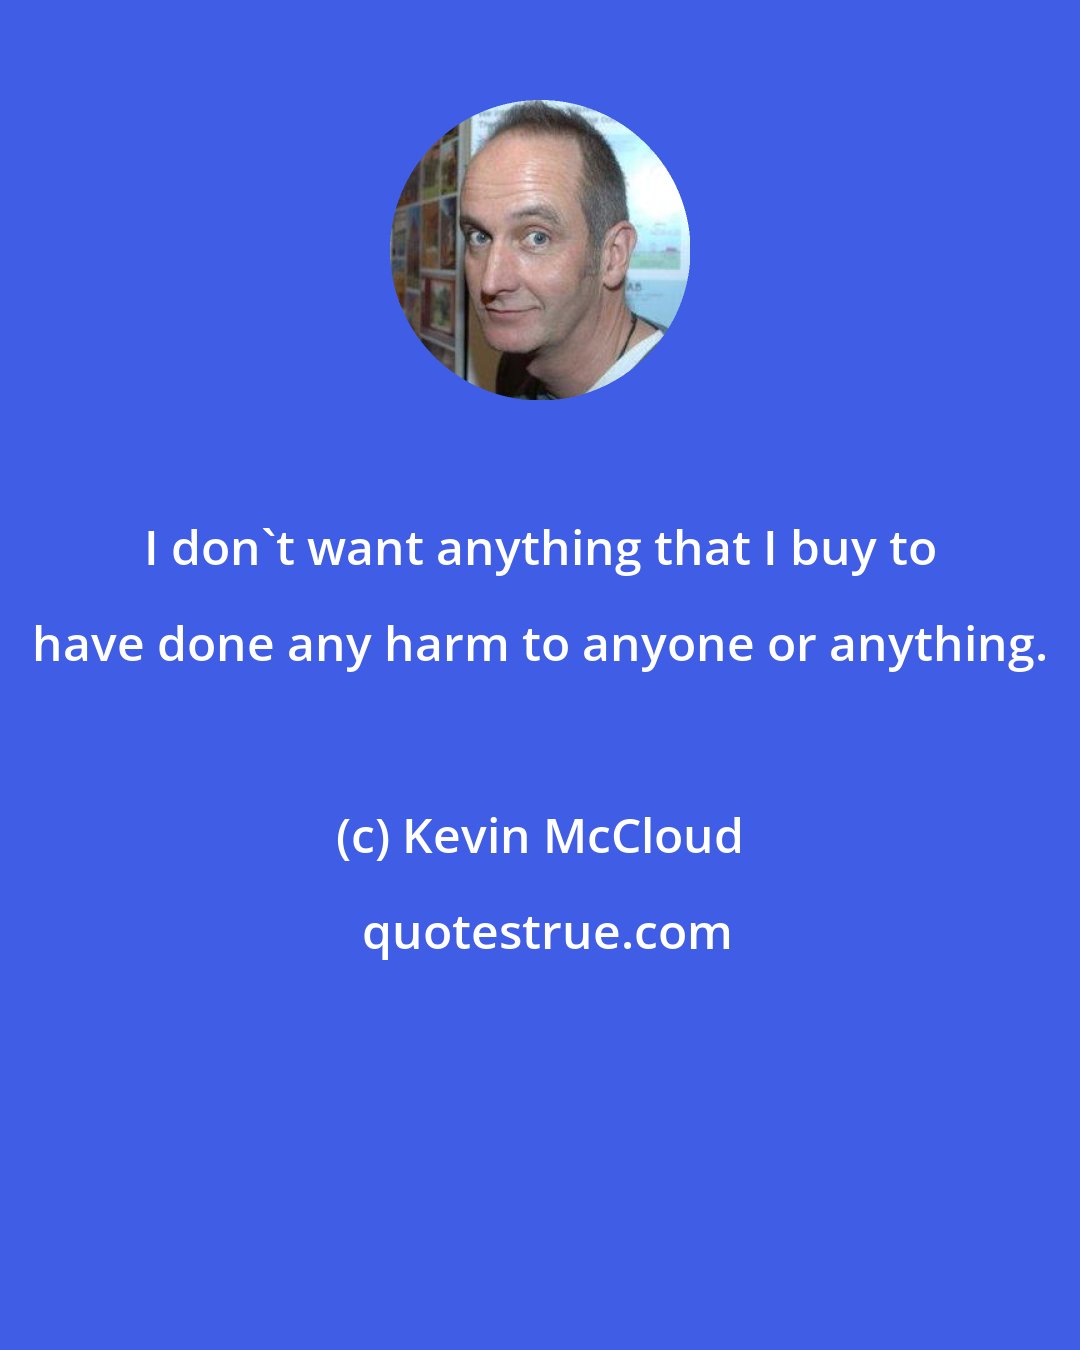 Kevin McCloud: I don't want anything that I buy to have done any harm to anyone or anything.